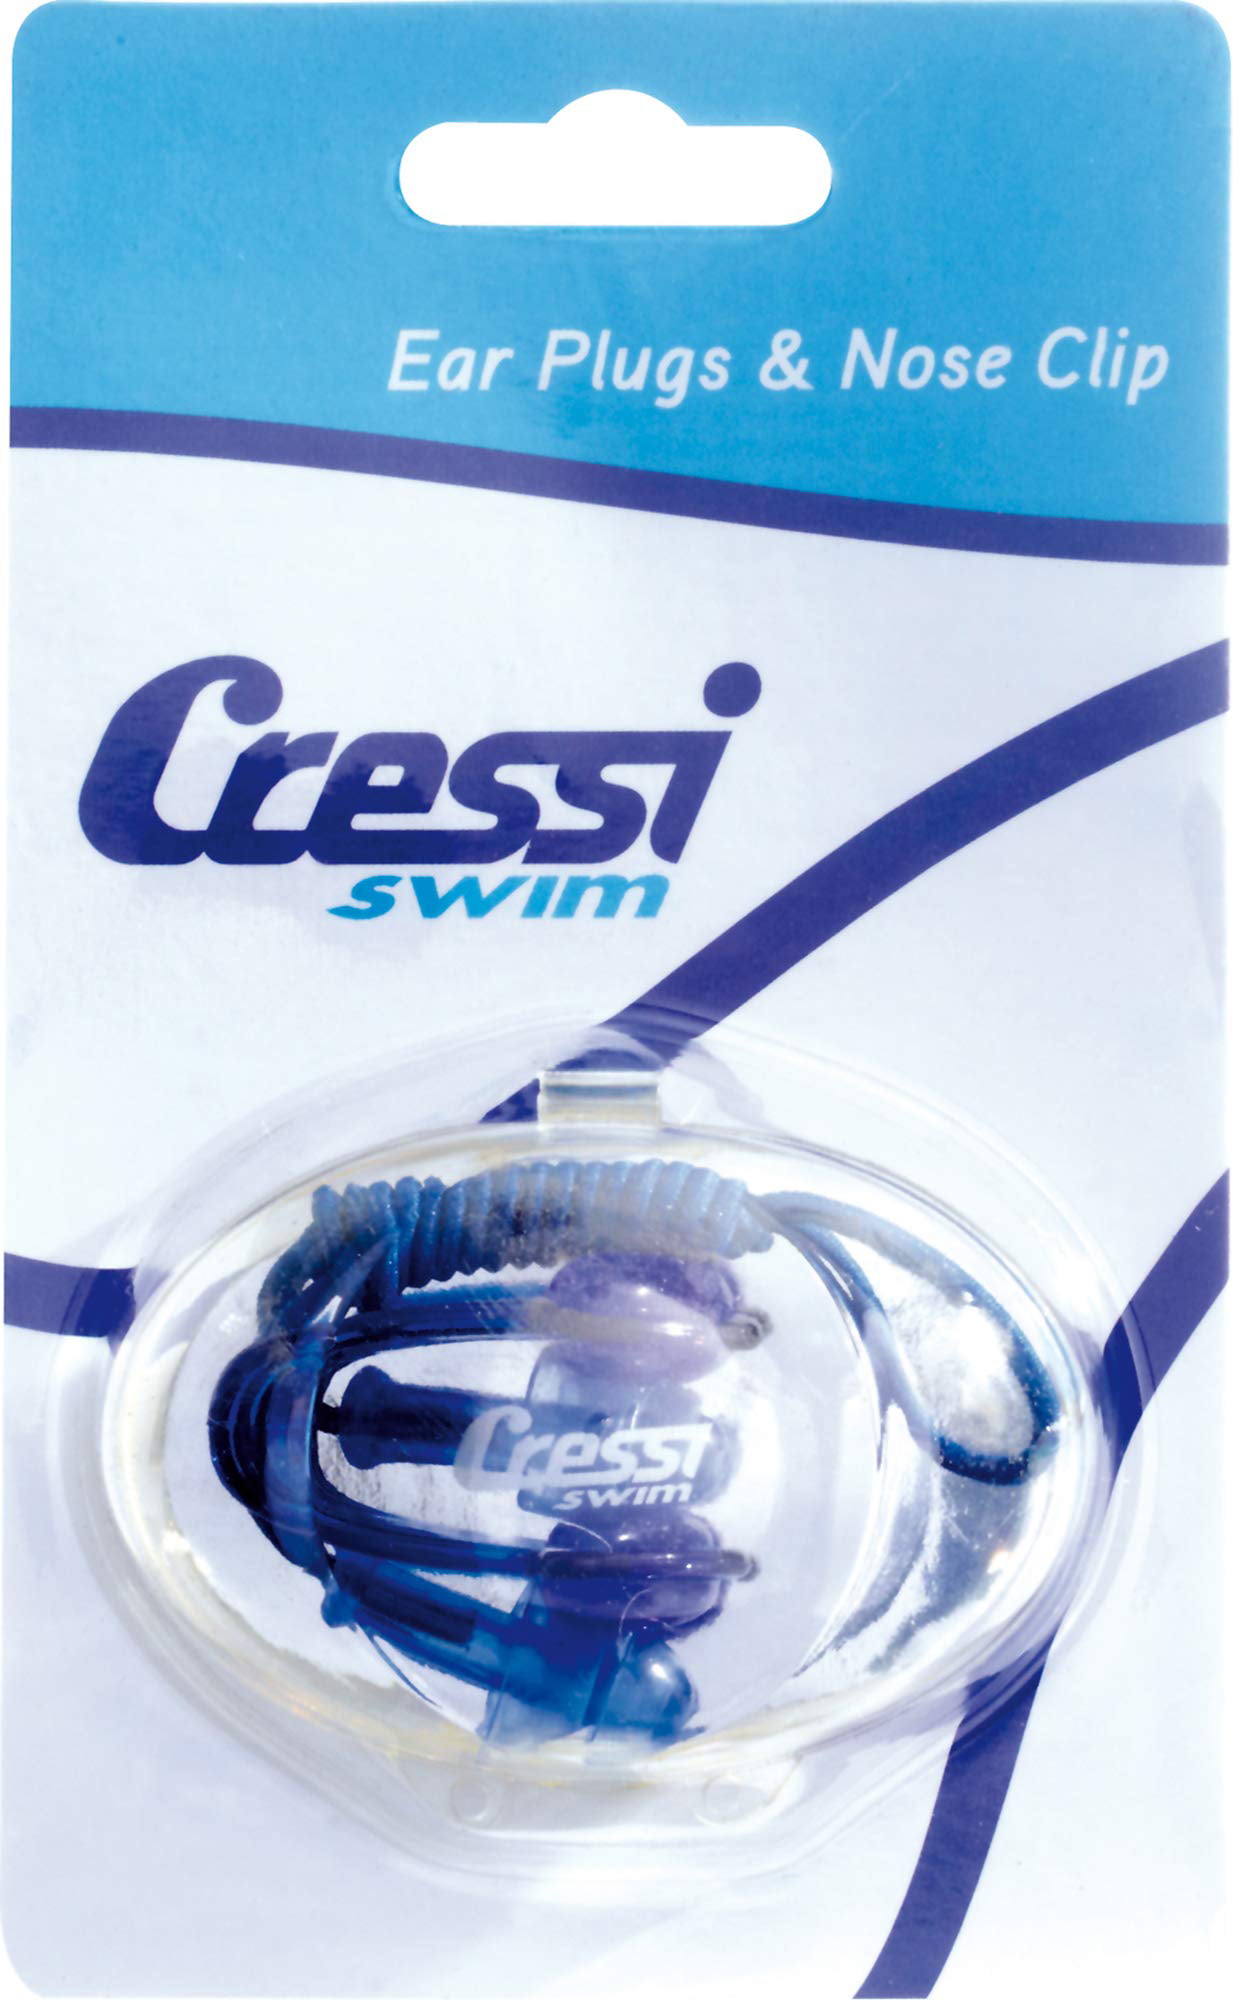 Cressi Unisex Ear Plugs and Nose Clip Swim Accessories Clear/Blue-Kit Ear Plugs 